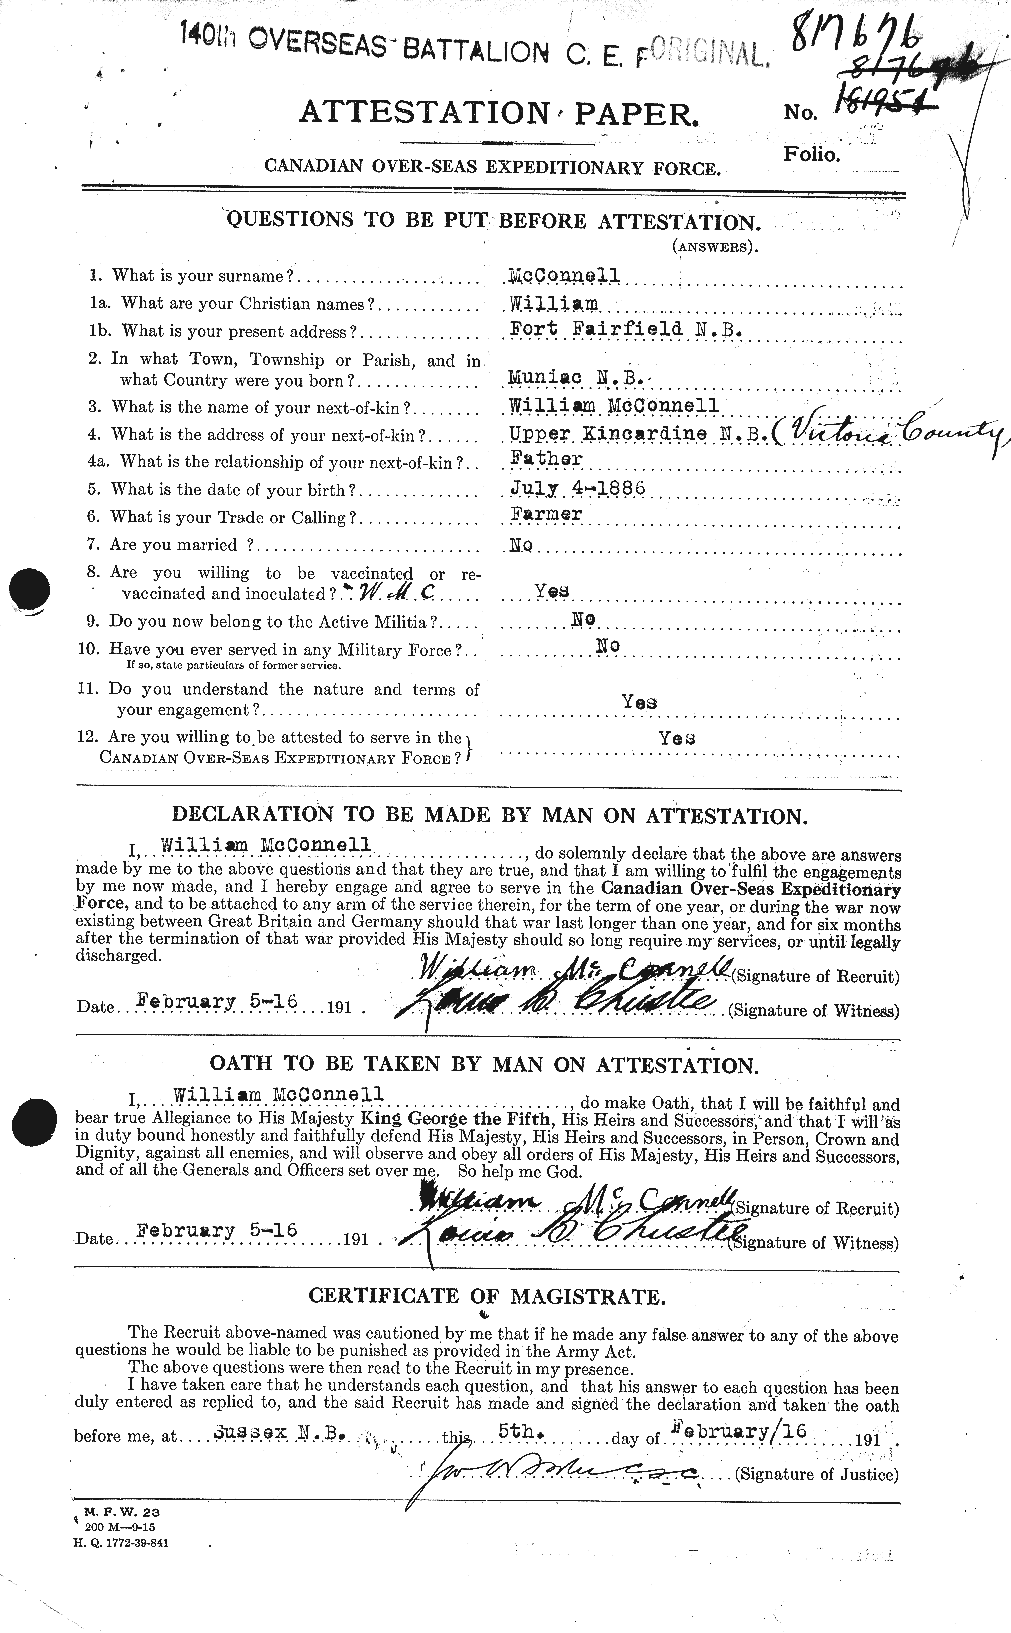 Personnel Records of the First World War - CEF 134350a